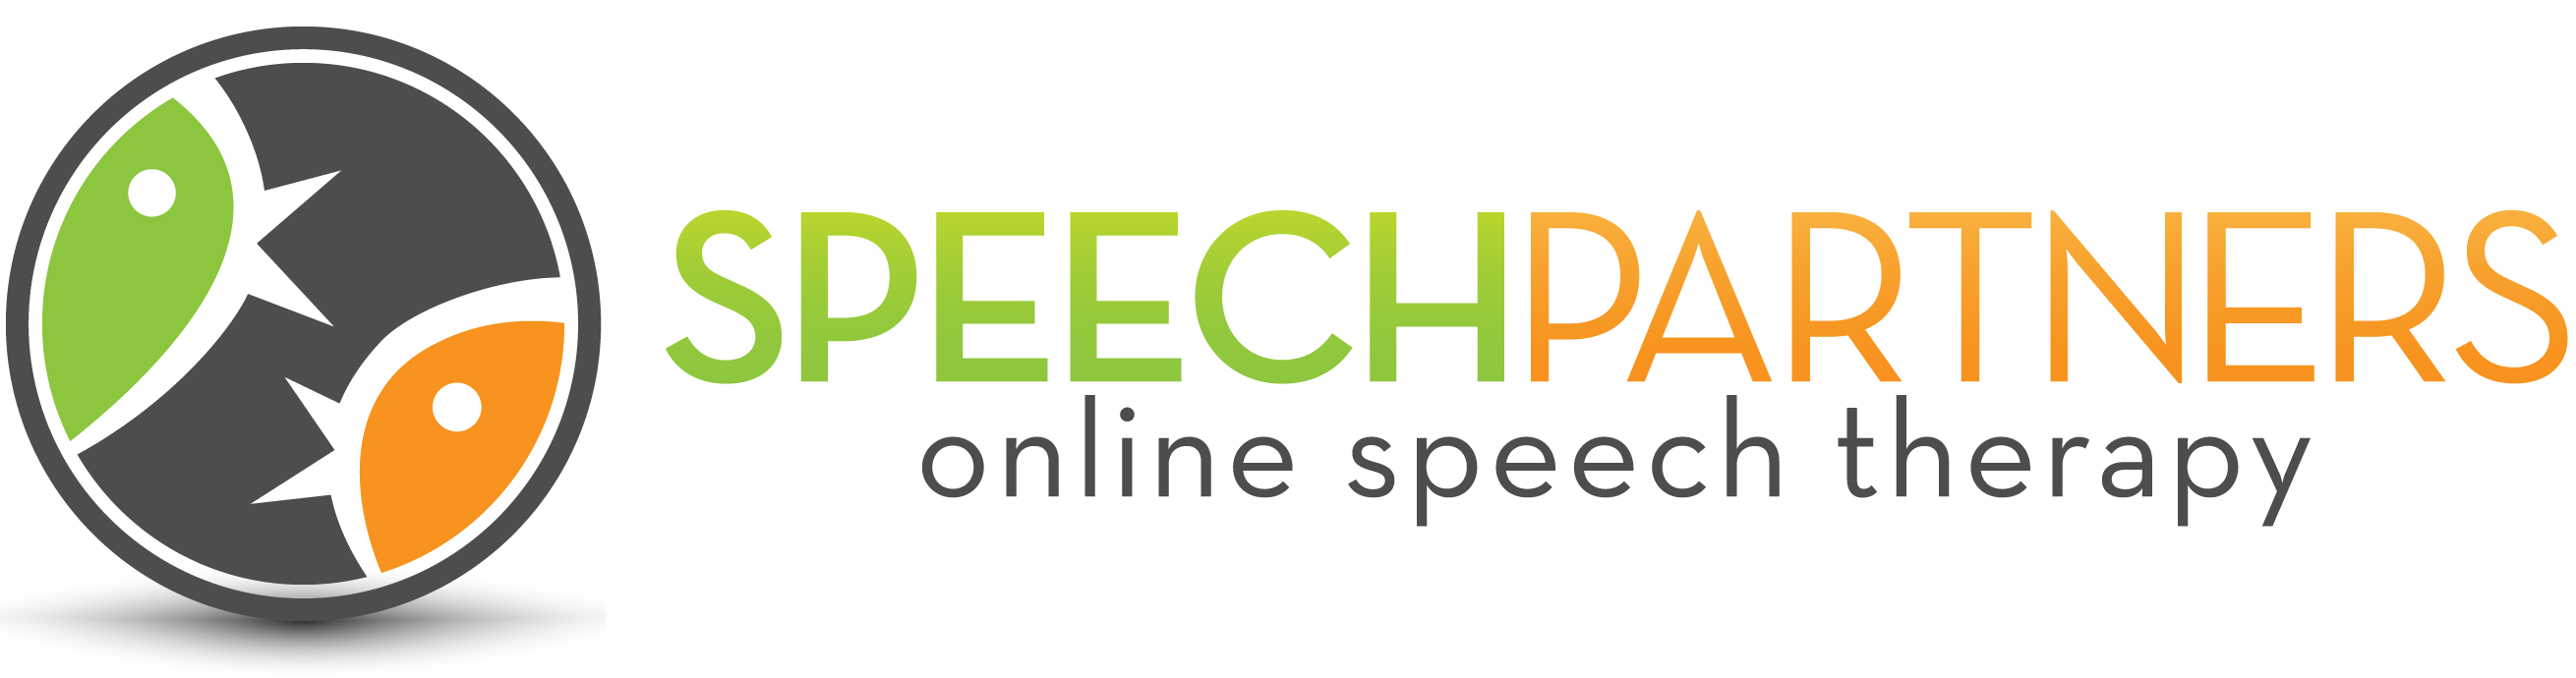 Speech Partners - Online speech therapy dedicated to helping